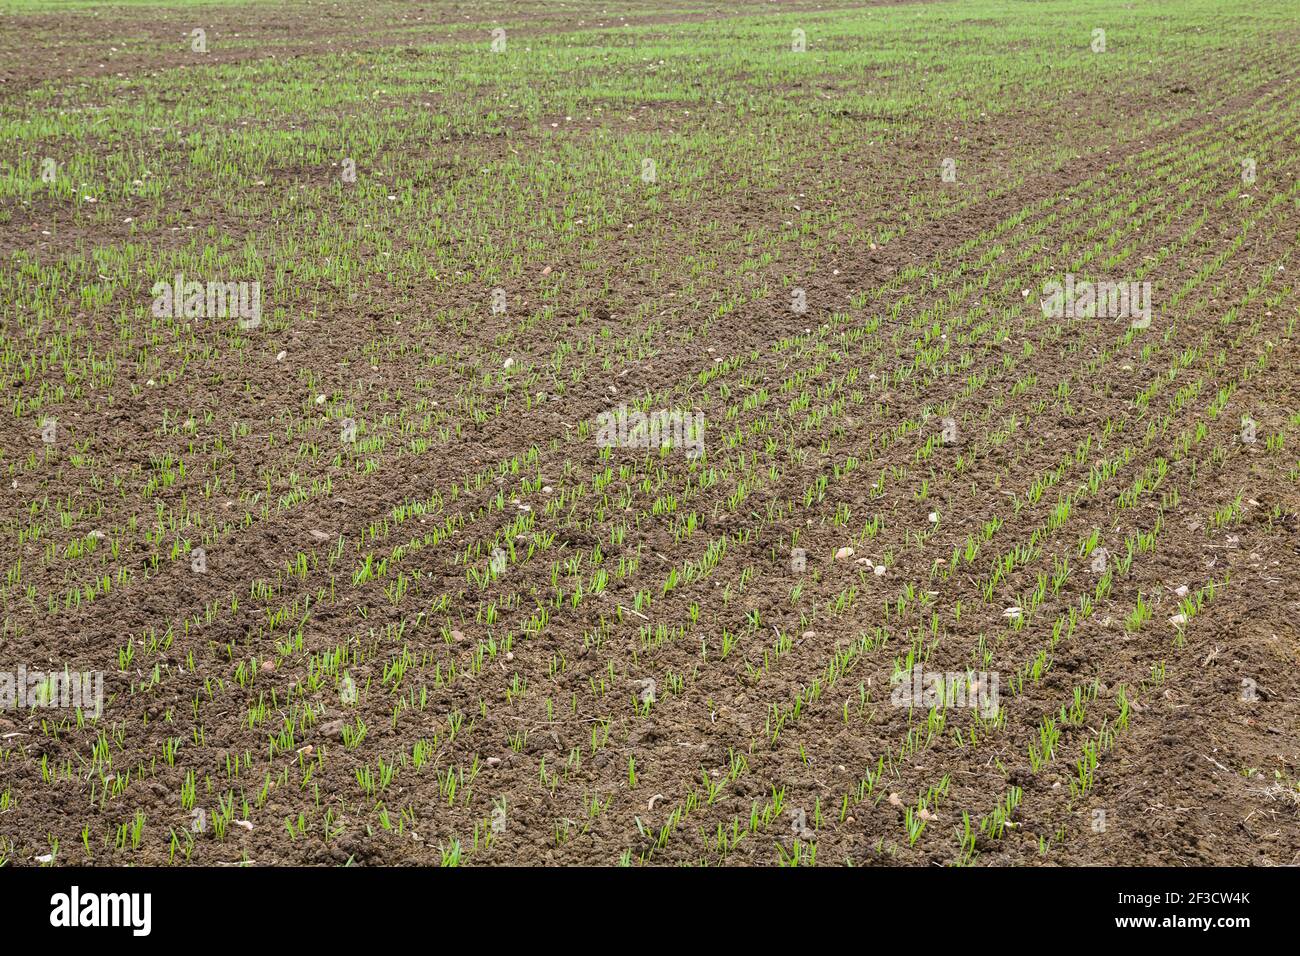 Agriculture background, seedlings (young plants) in an agricultural field of crops, UK Stock Photo